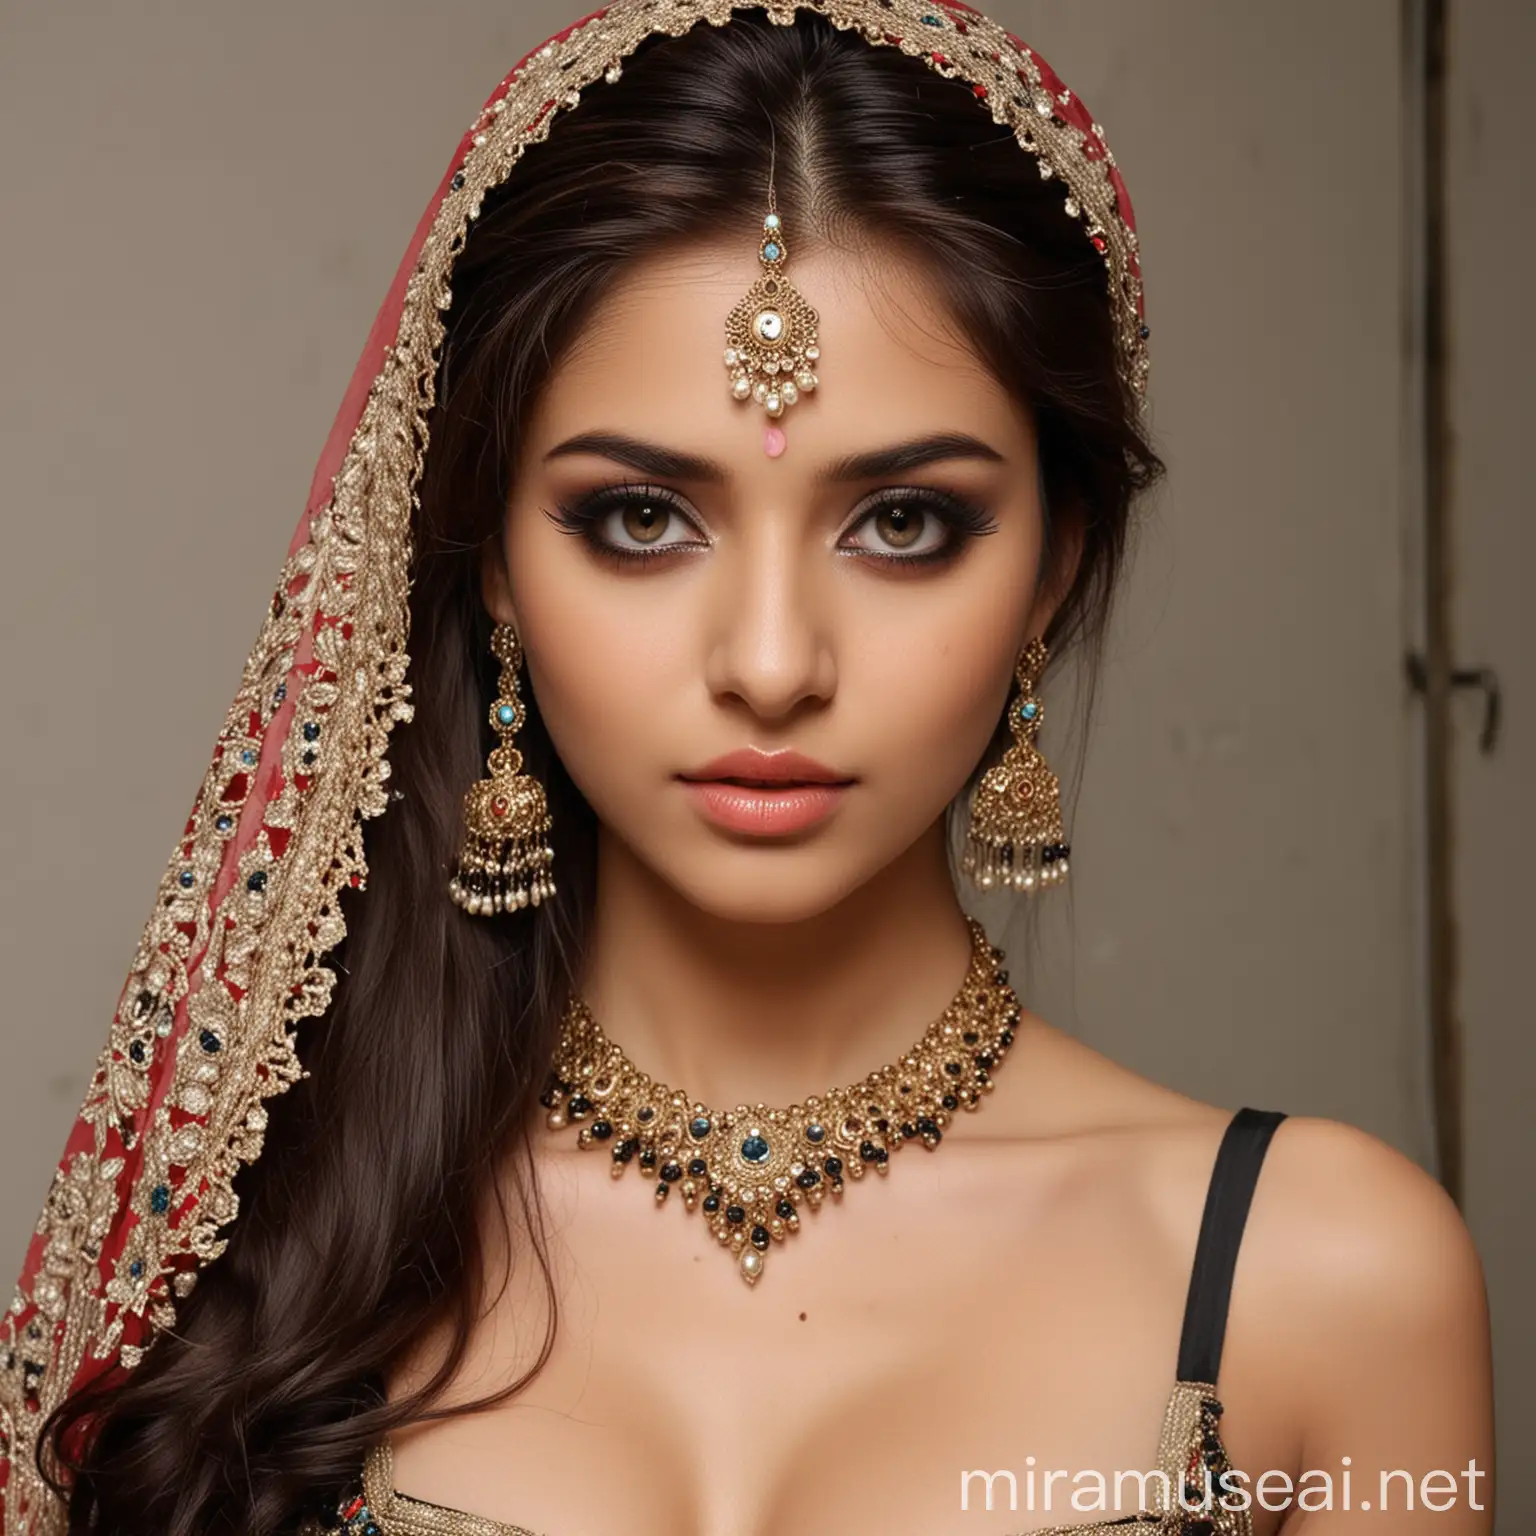 Extreme Beautiful Pakistani Model Girl in Indian Makeup and Bra